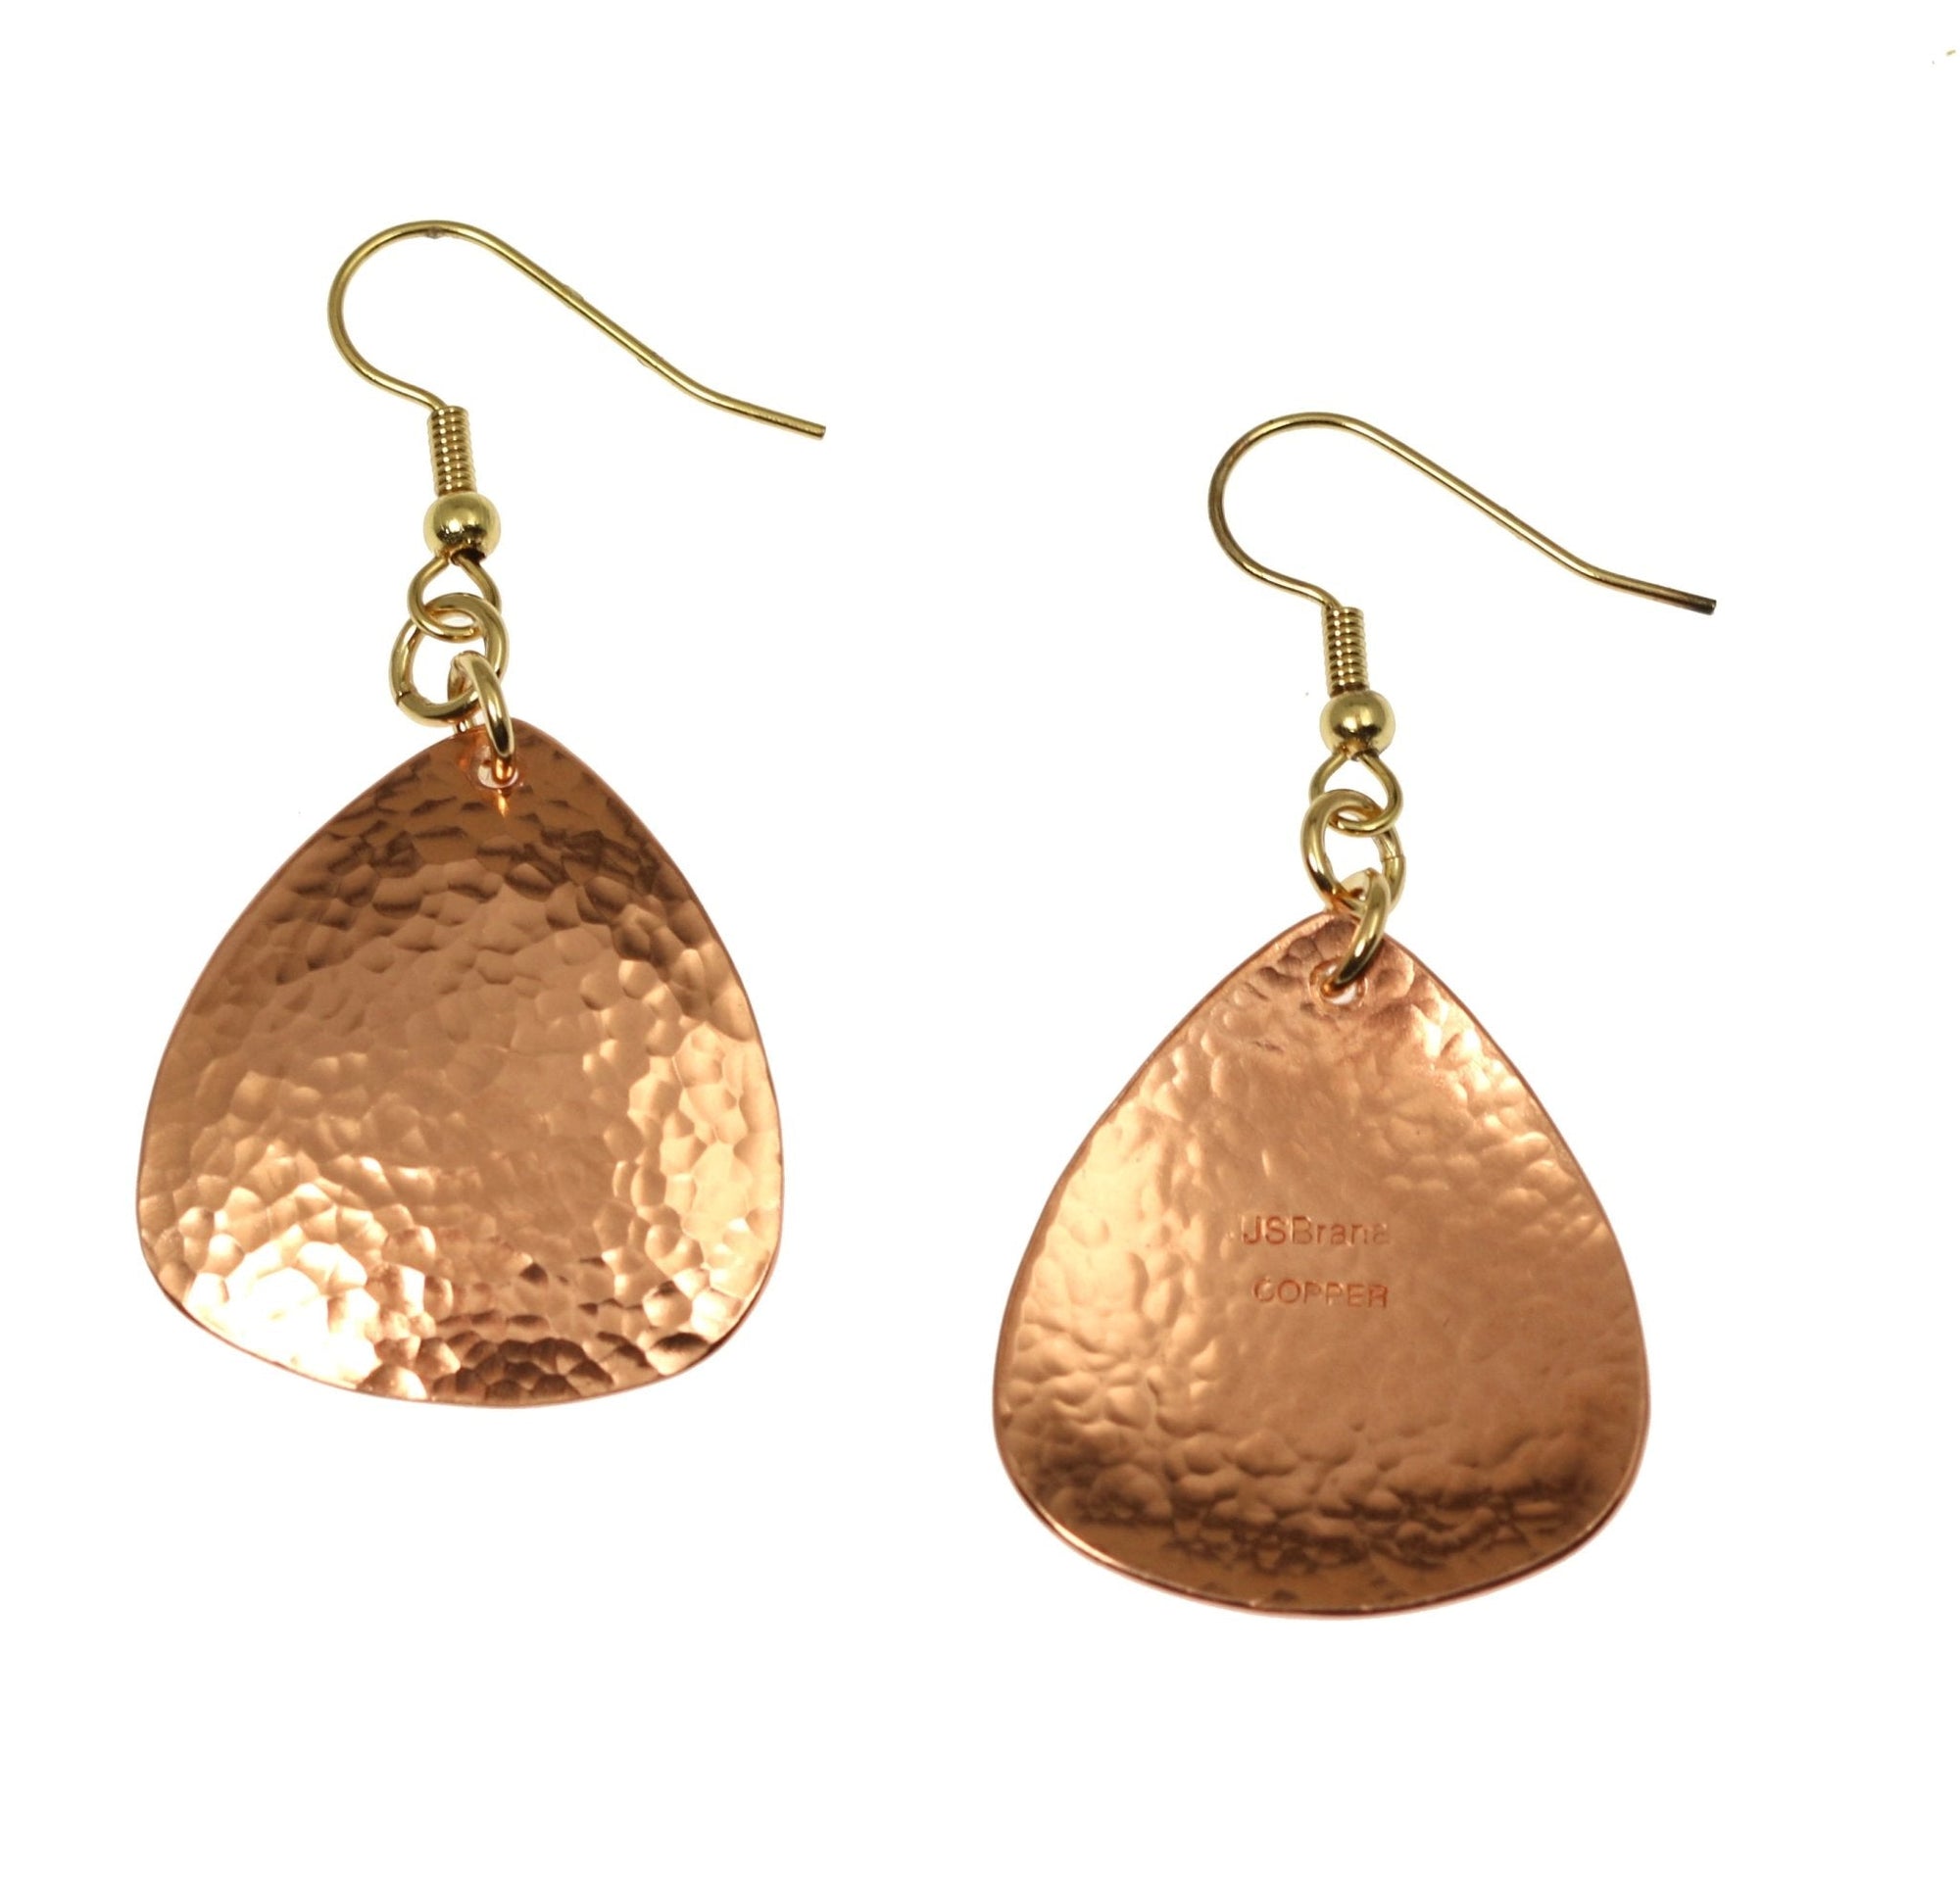 Hammered Copper Triangular Drop Earrings Front and Back View